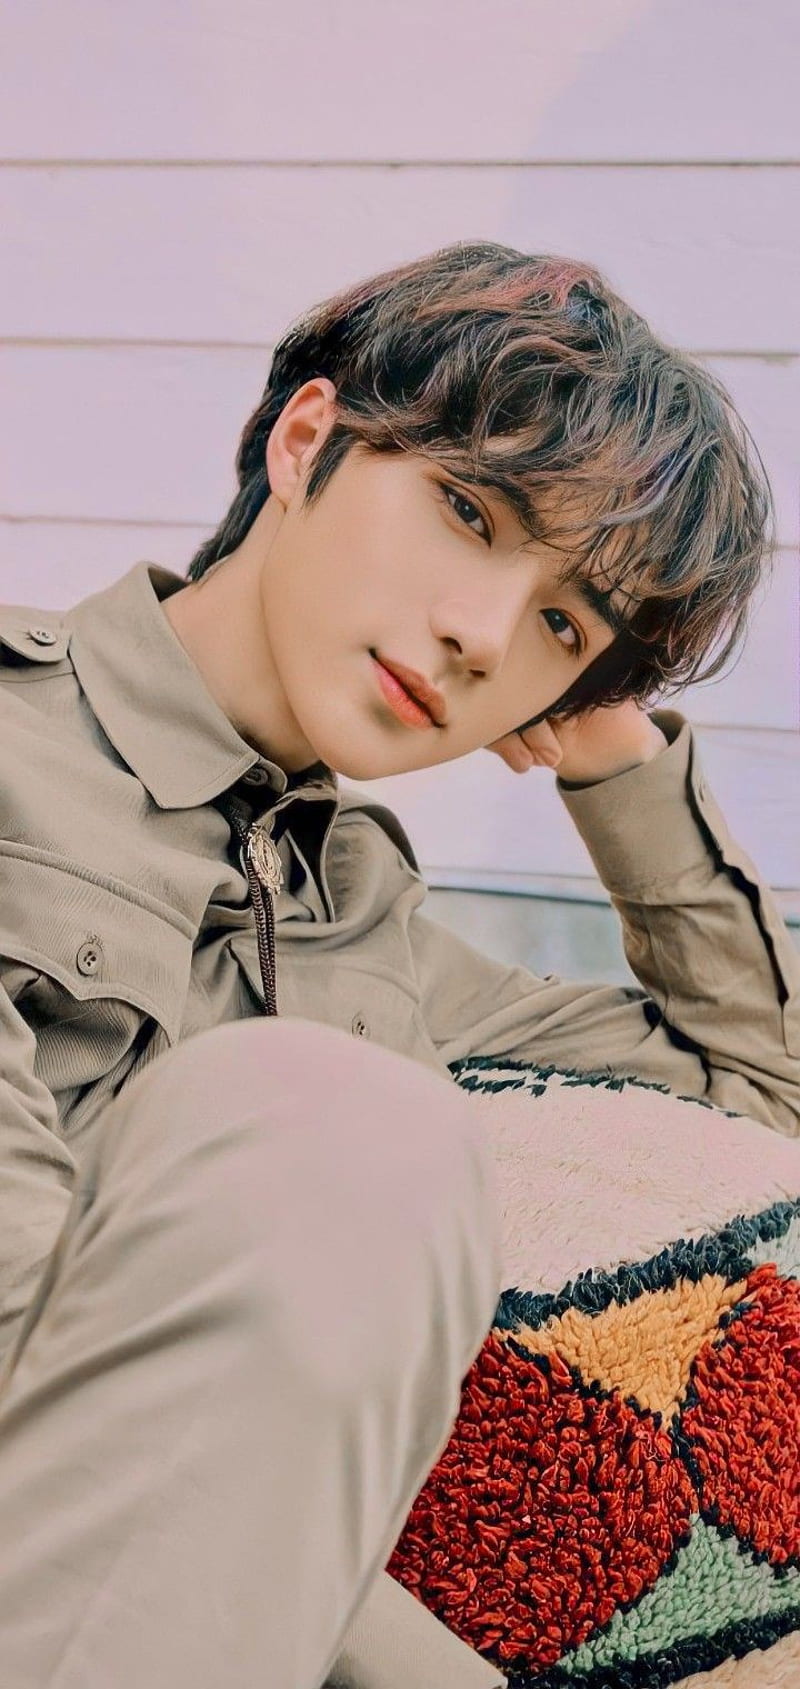 TXT Beomgyu Chaos Chapter FREEZE 4K Phone iPhone Wallpaper 4510a